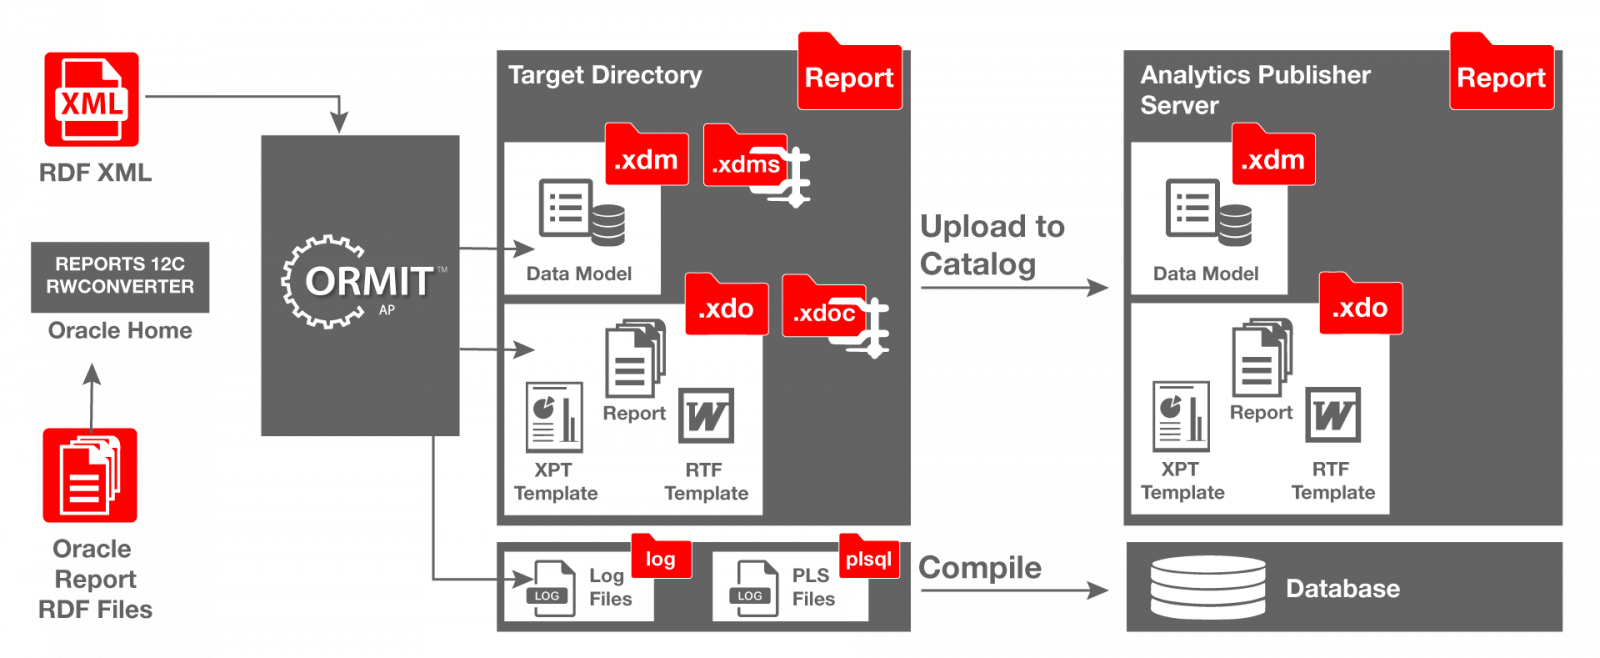 convert Oracle Reports to Analytics Publisher